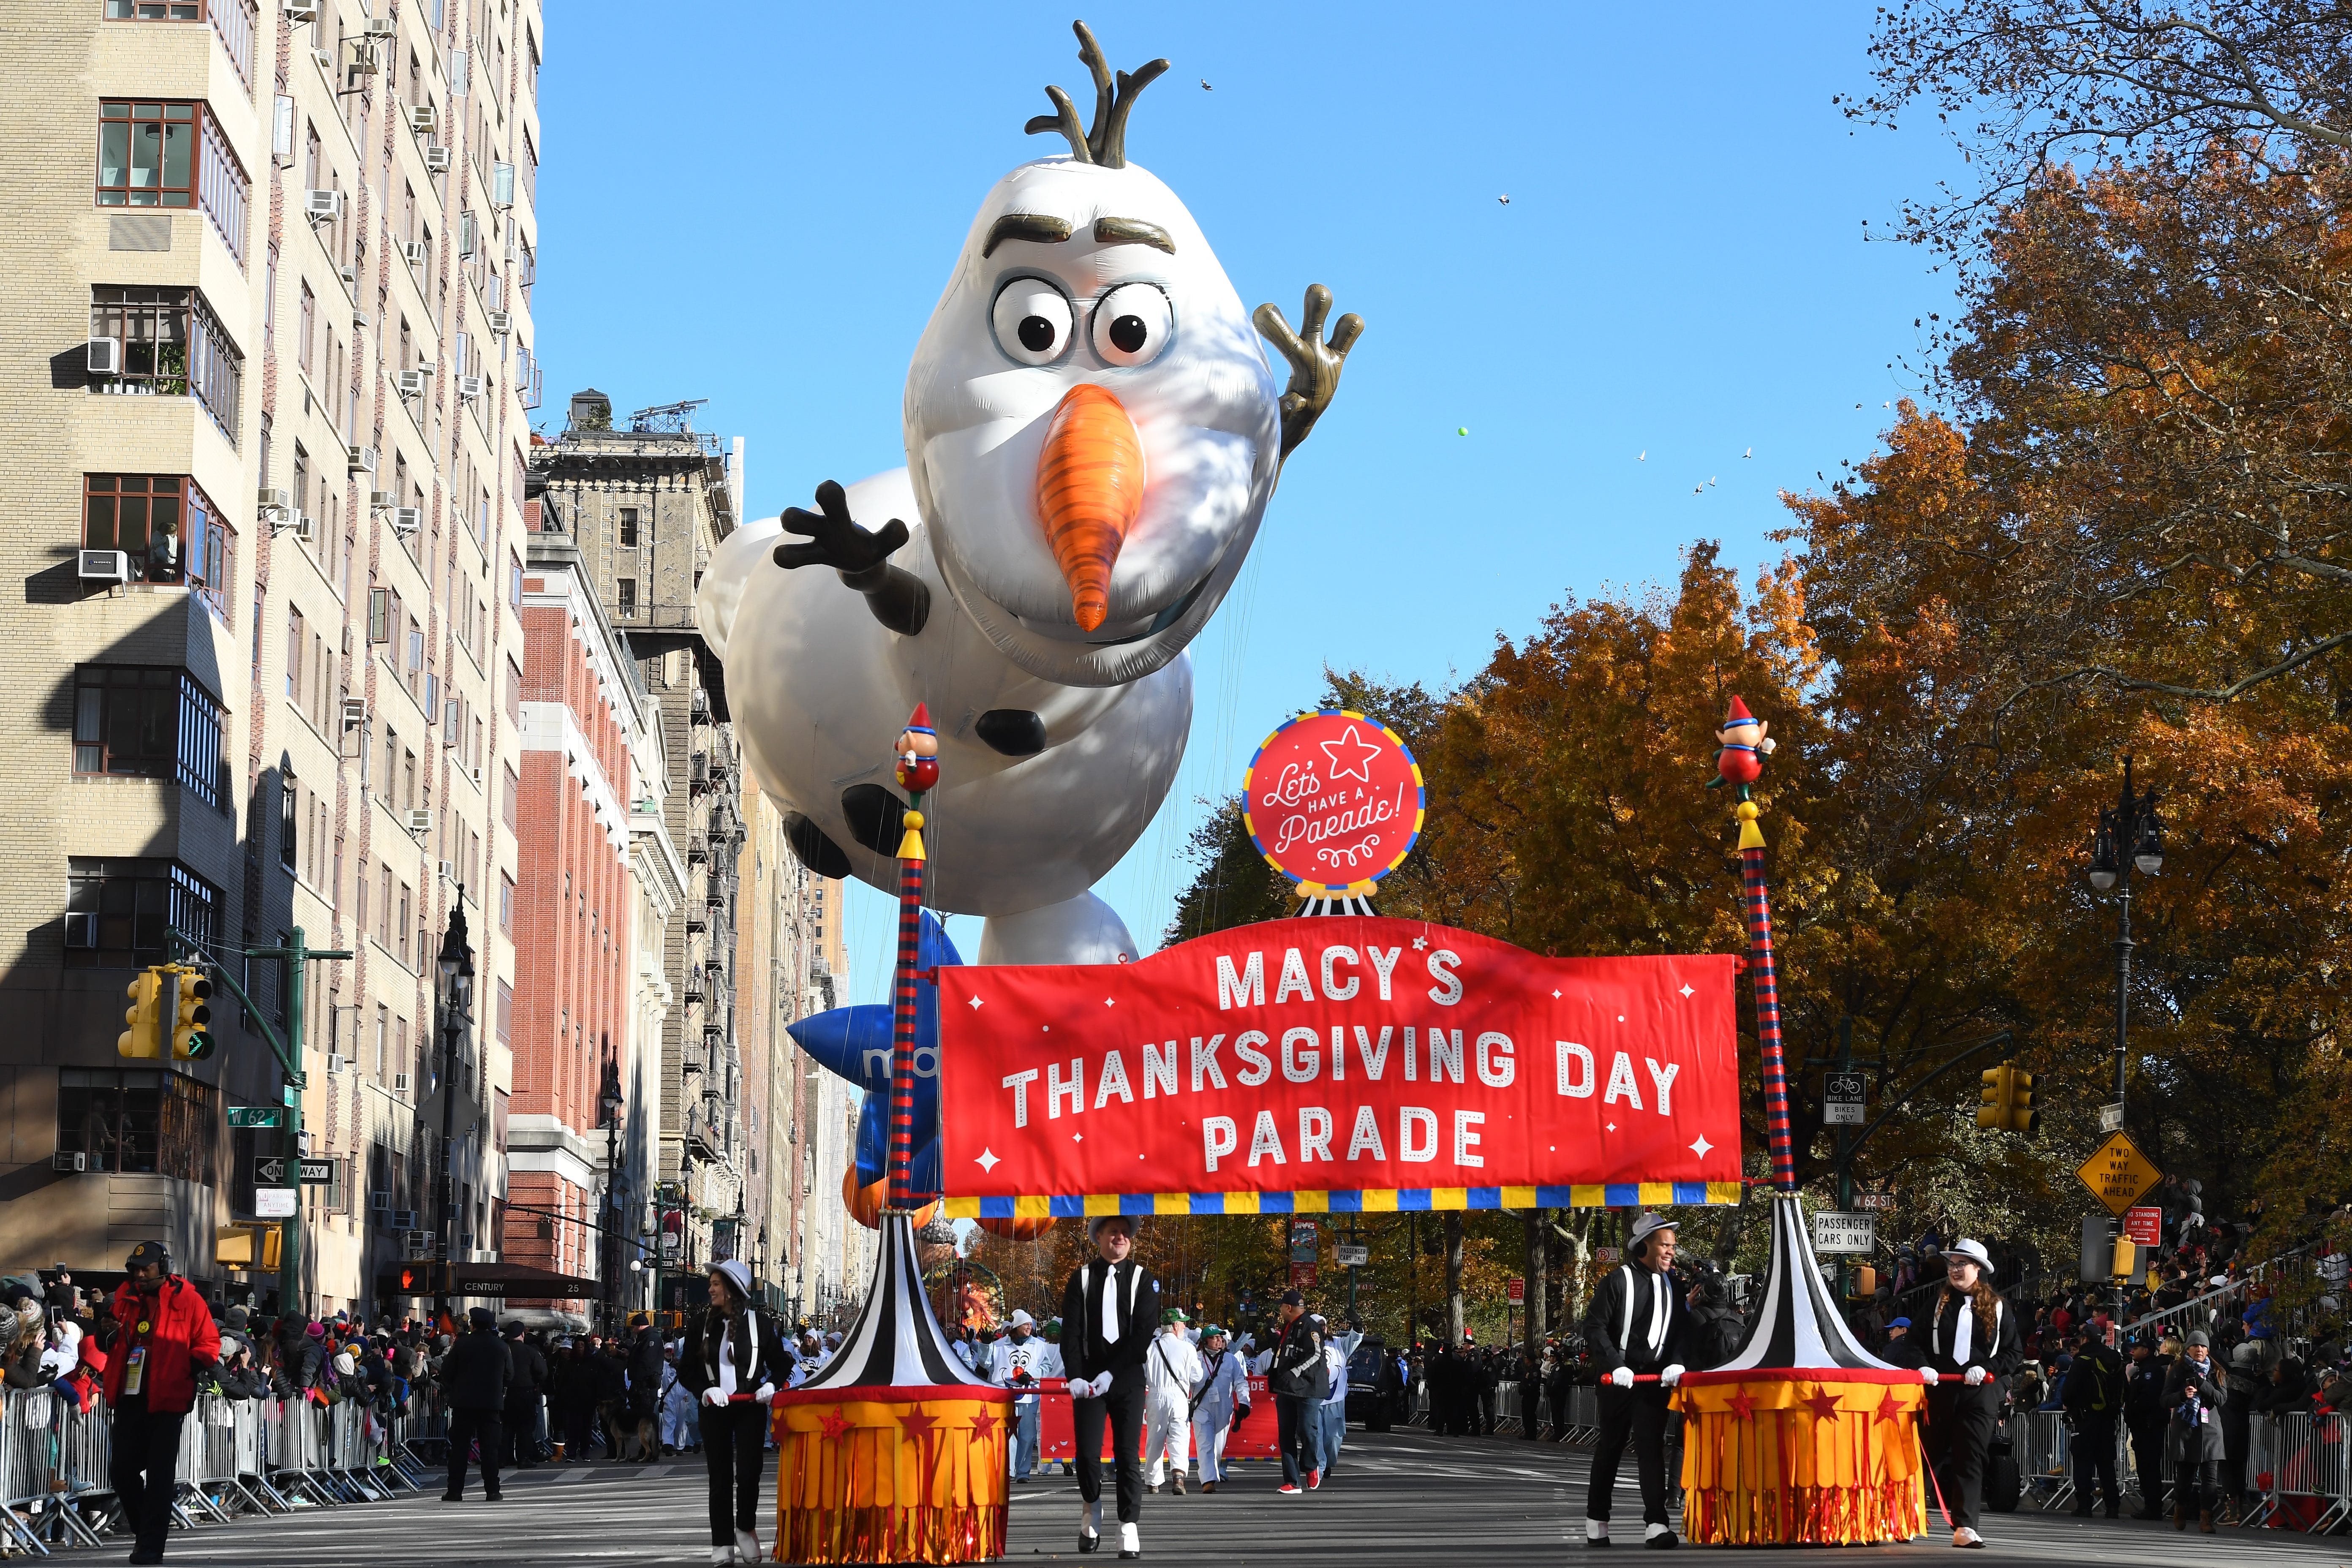 Macy's Thanksgiving Day Parade Floats, bands and tight security